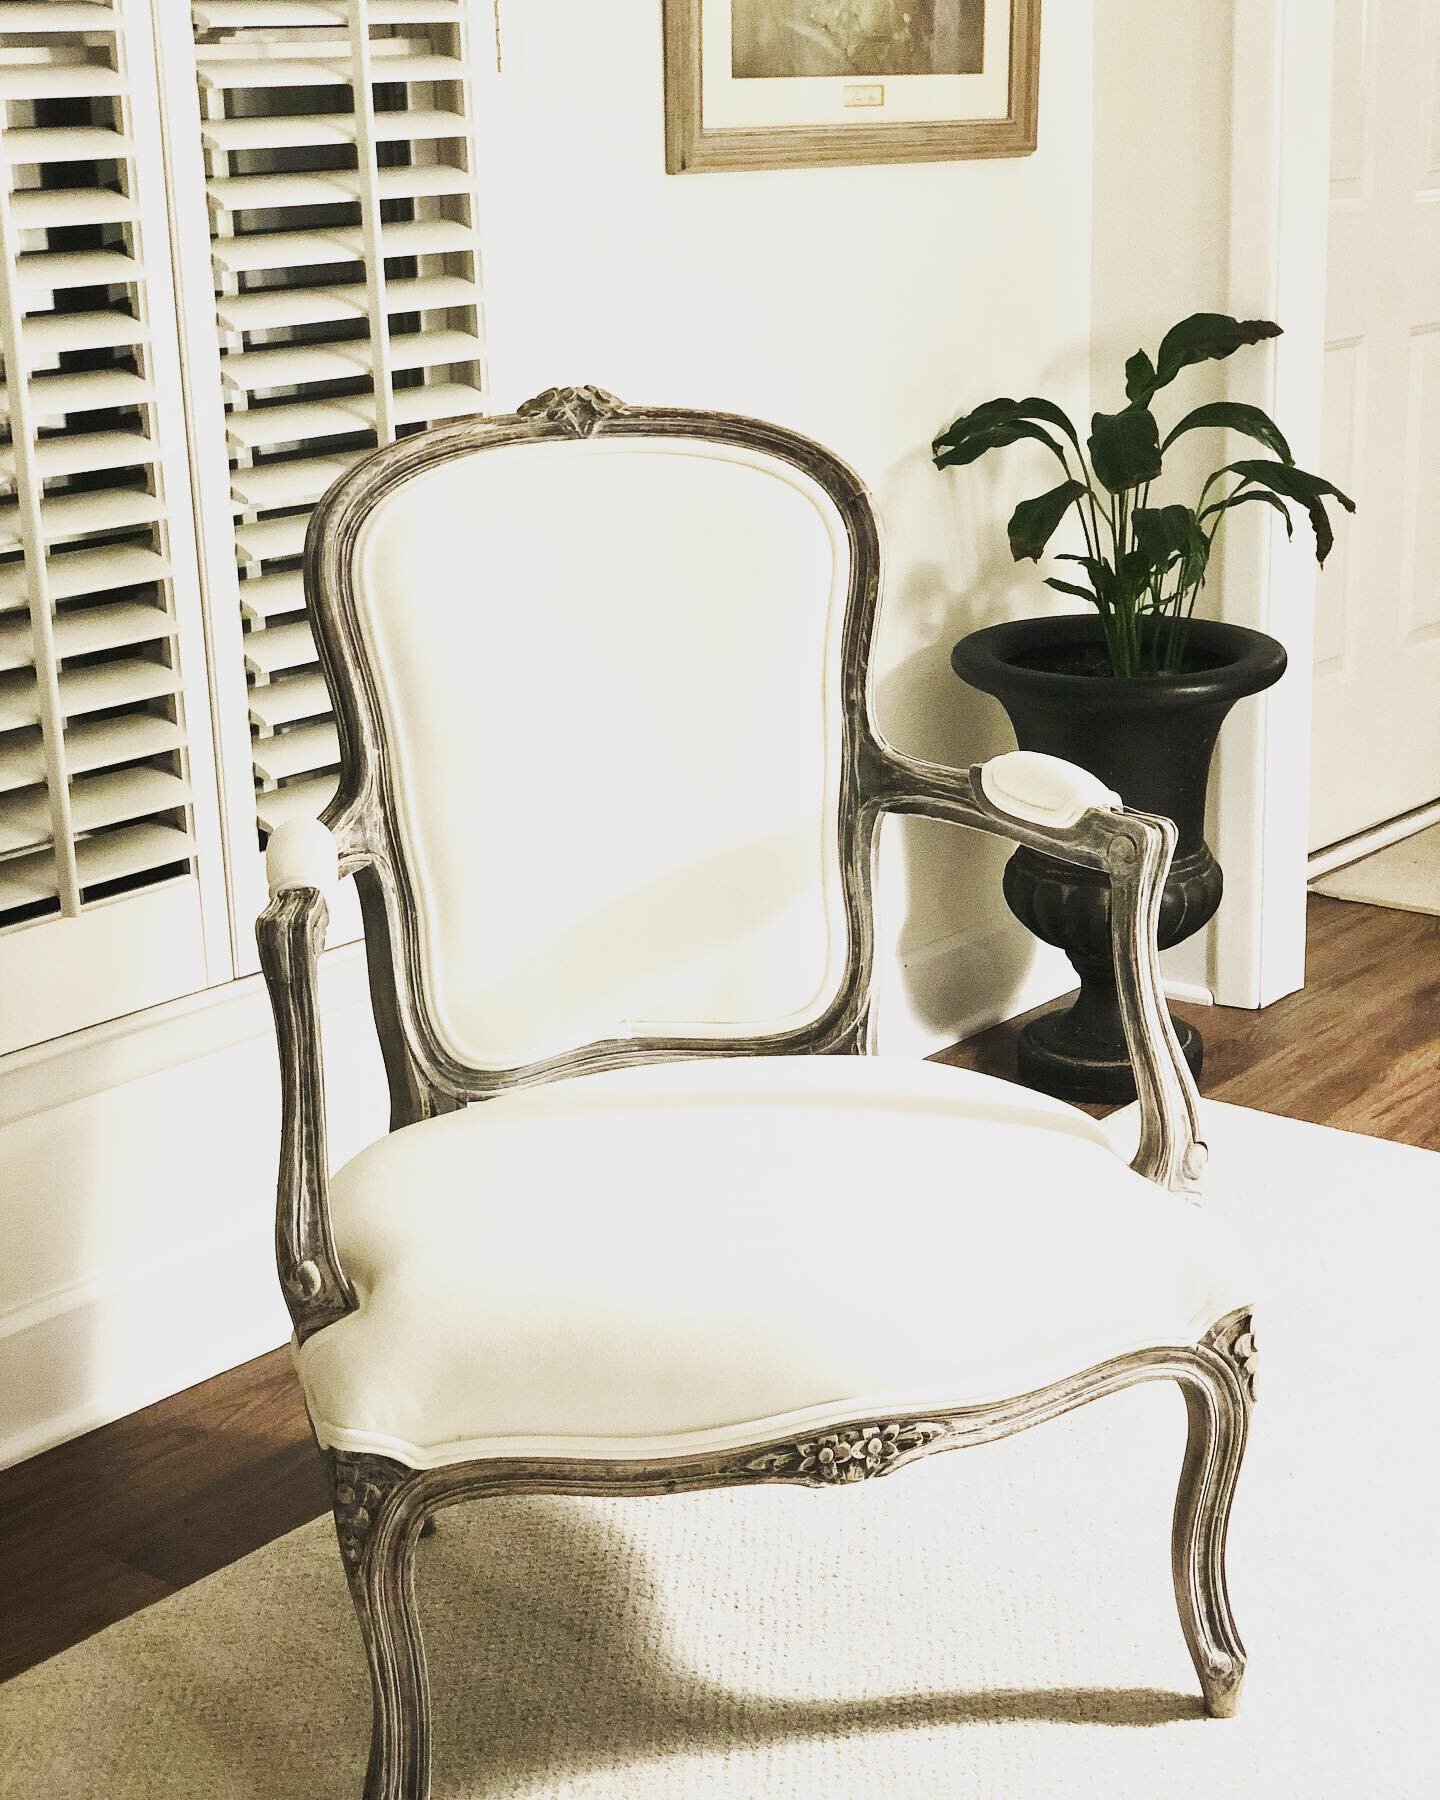 Have you ever tried bleaching your furniture? This vintage chair used to be a very dark mahogany stain with a rose colored fabric!
Then one day I got the idea to use fabric paint.  I painted the rose fabric in a creamy white. It became very stiff and